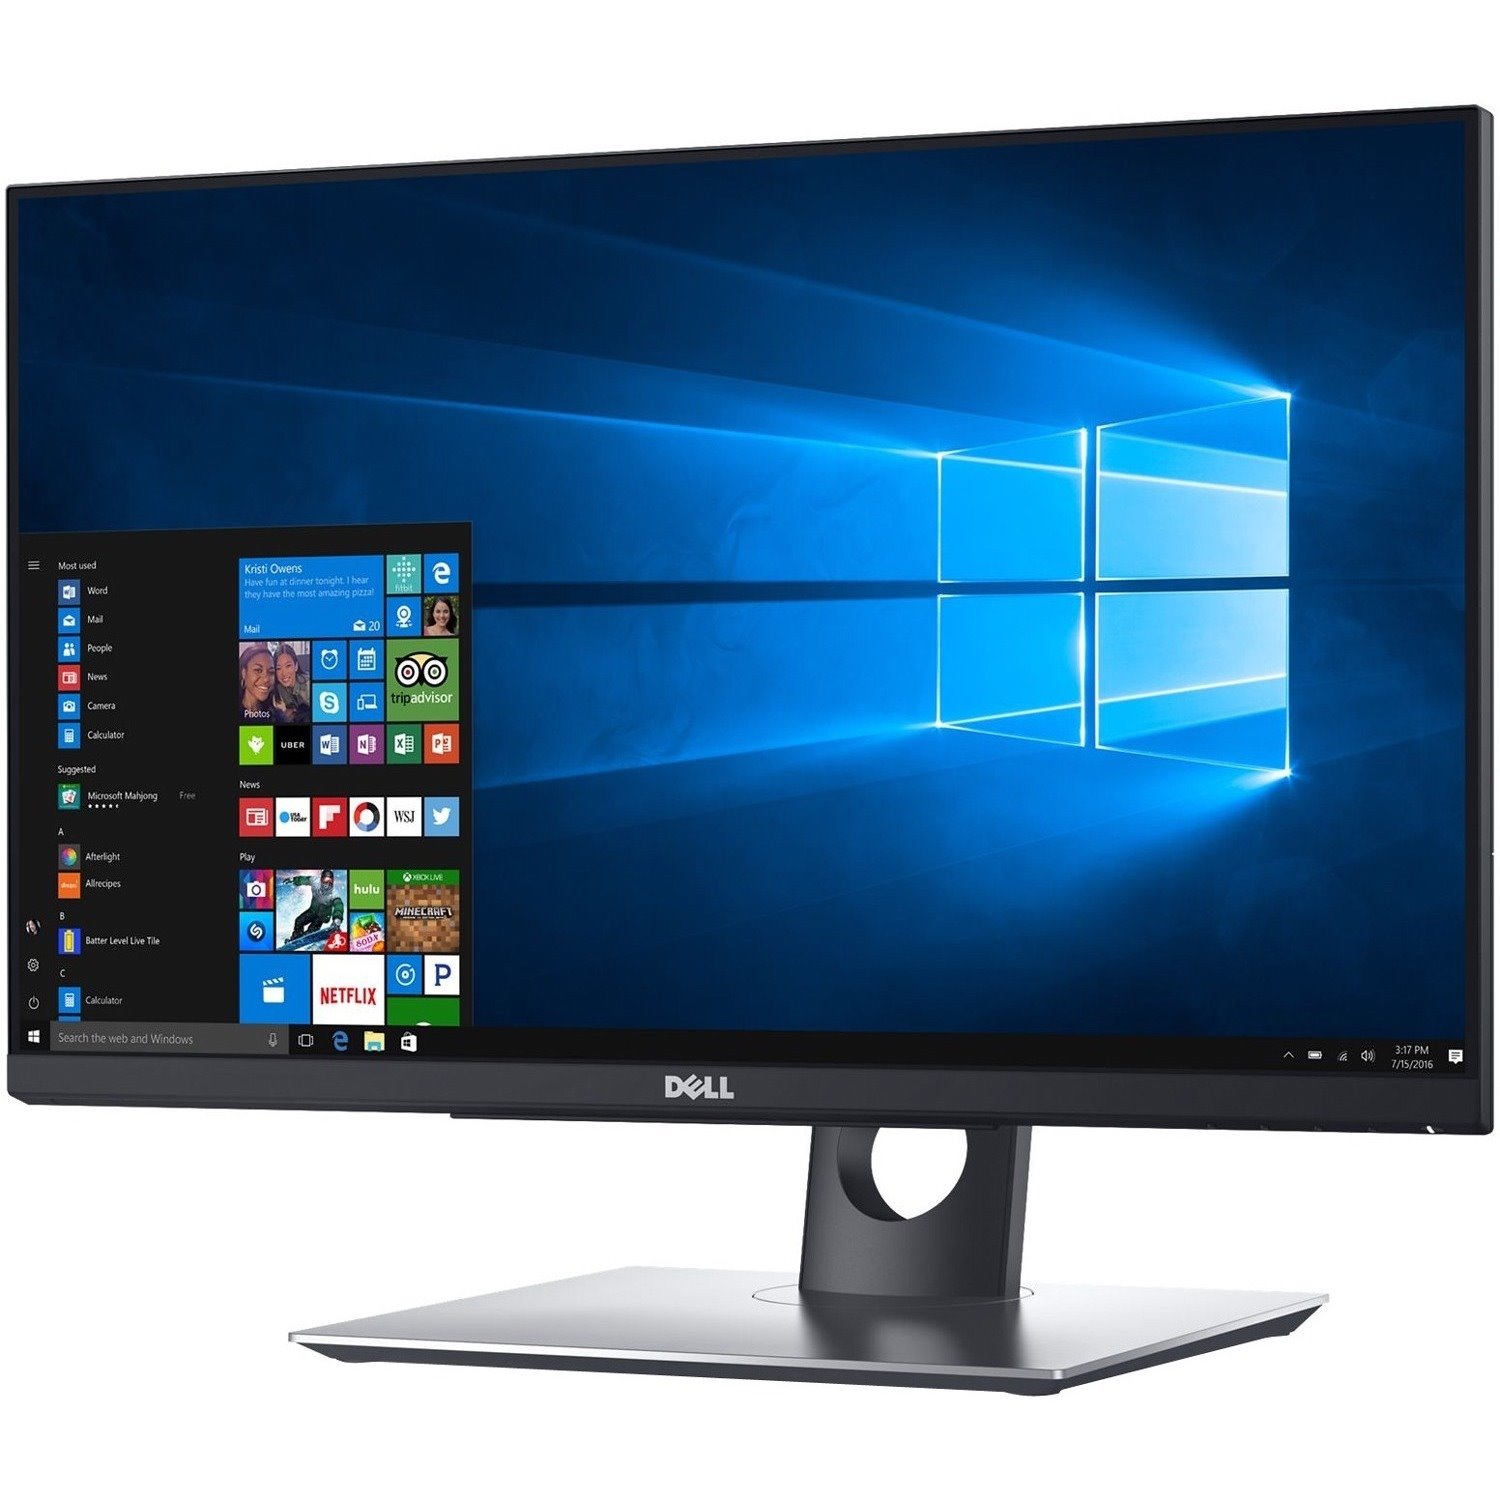 Dell P2418HT 23.8" LCD Touchscreen Monitor - 16:9 - 6 ms GTG